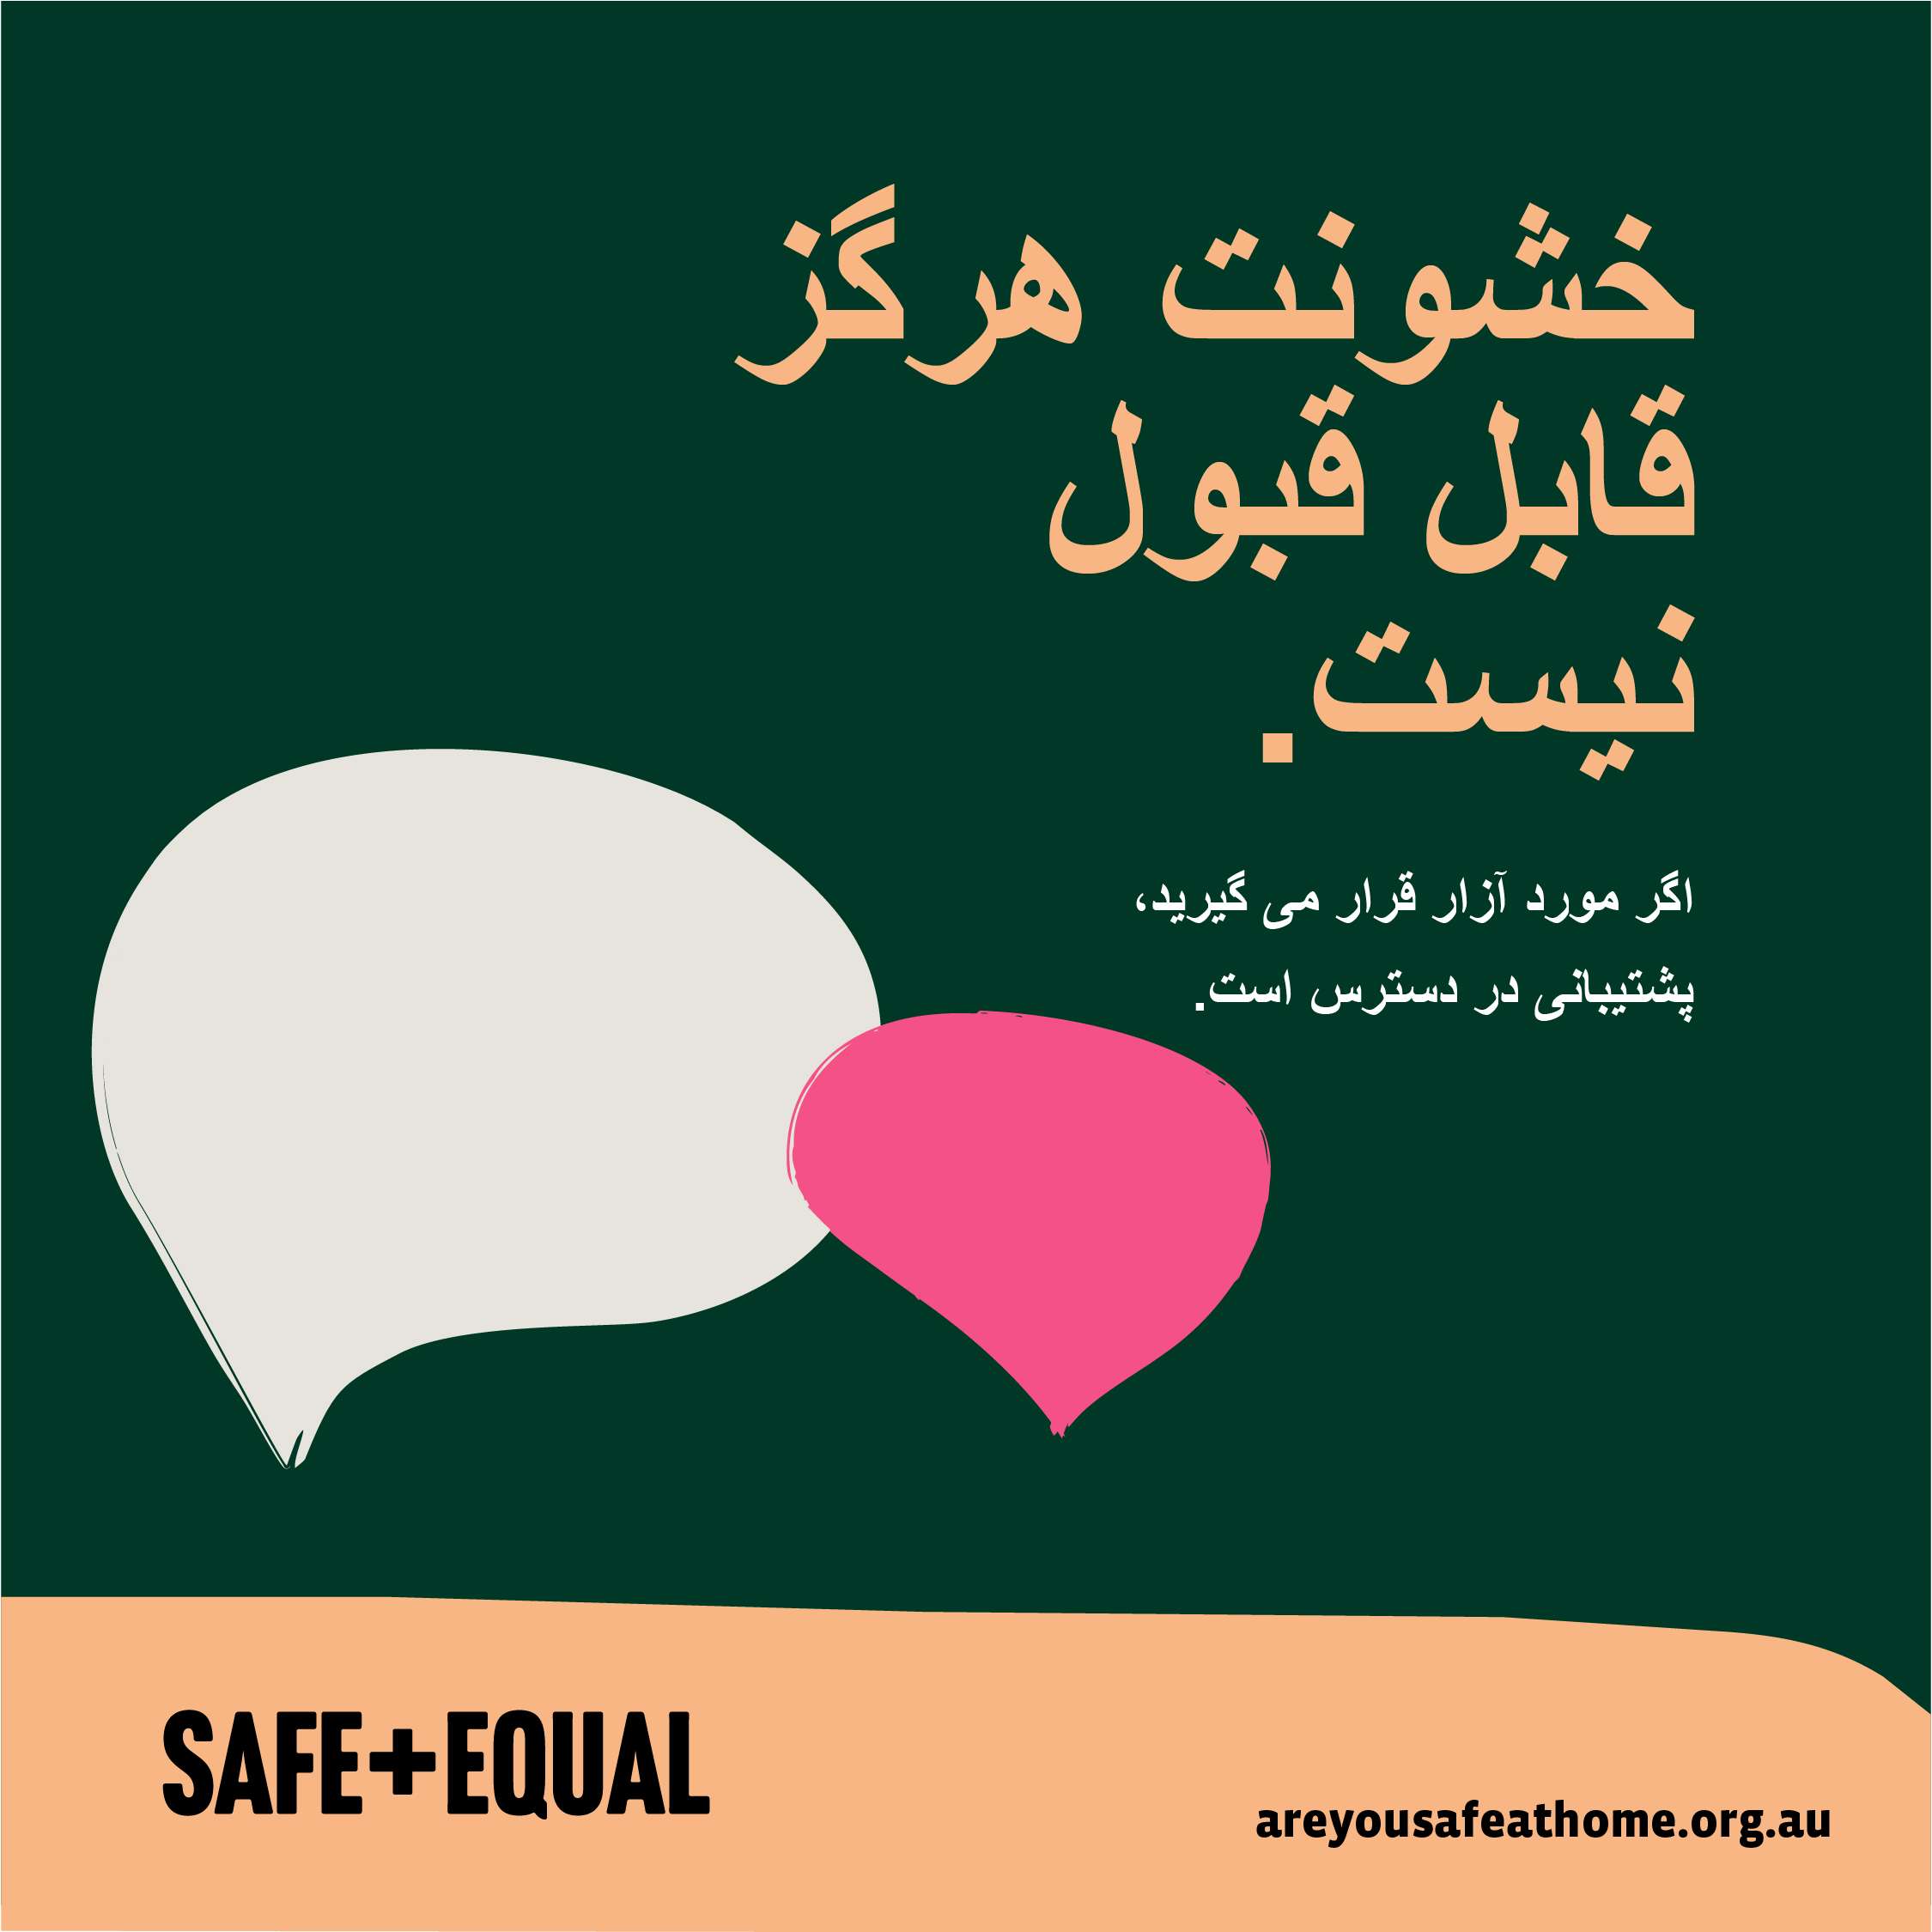 Social media tile for Are you safe at home translated into Farsi